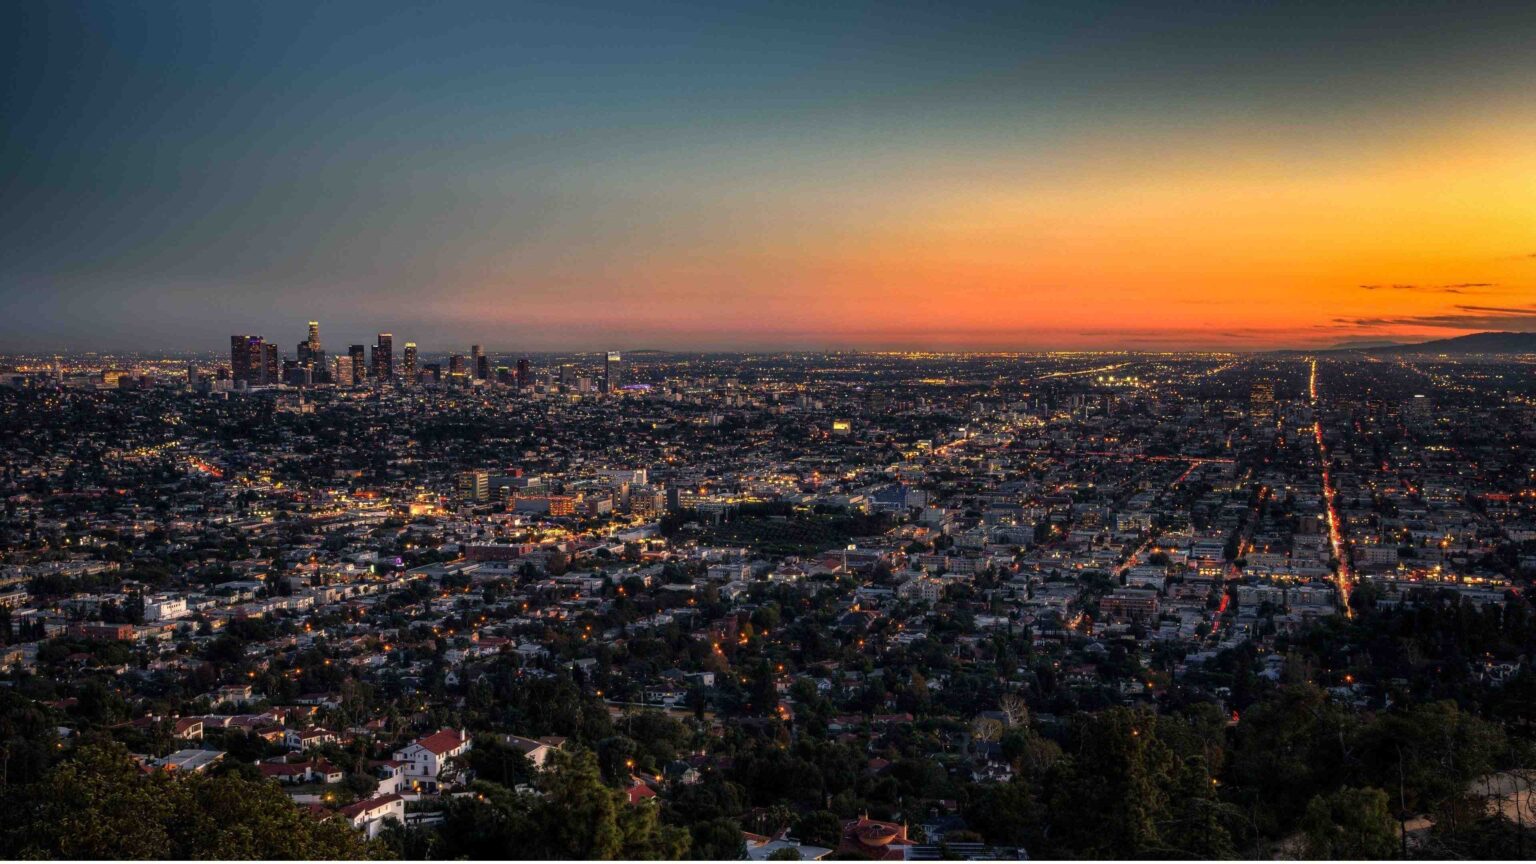 Experience the rollercoaster ride that is Los Angeles, where earthquakes create the real shake, rattle, and roll. Seismic shifts or Hollywood hits, find out why every day is #earthquake day in LA.